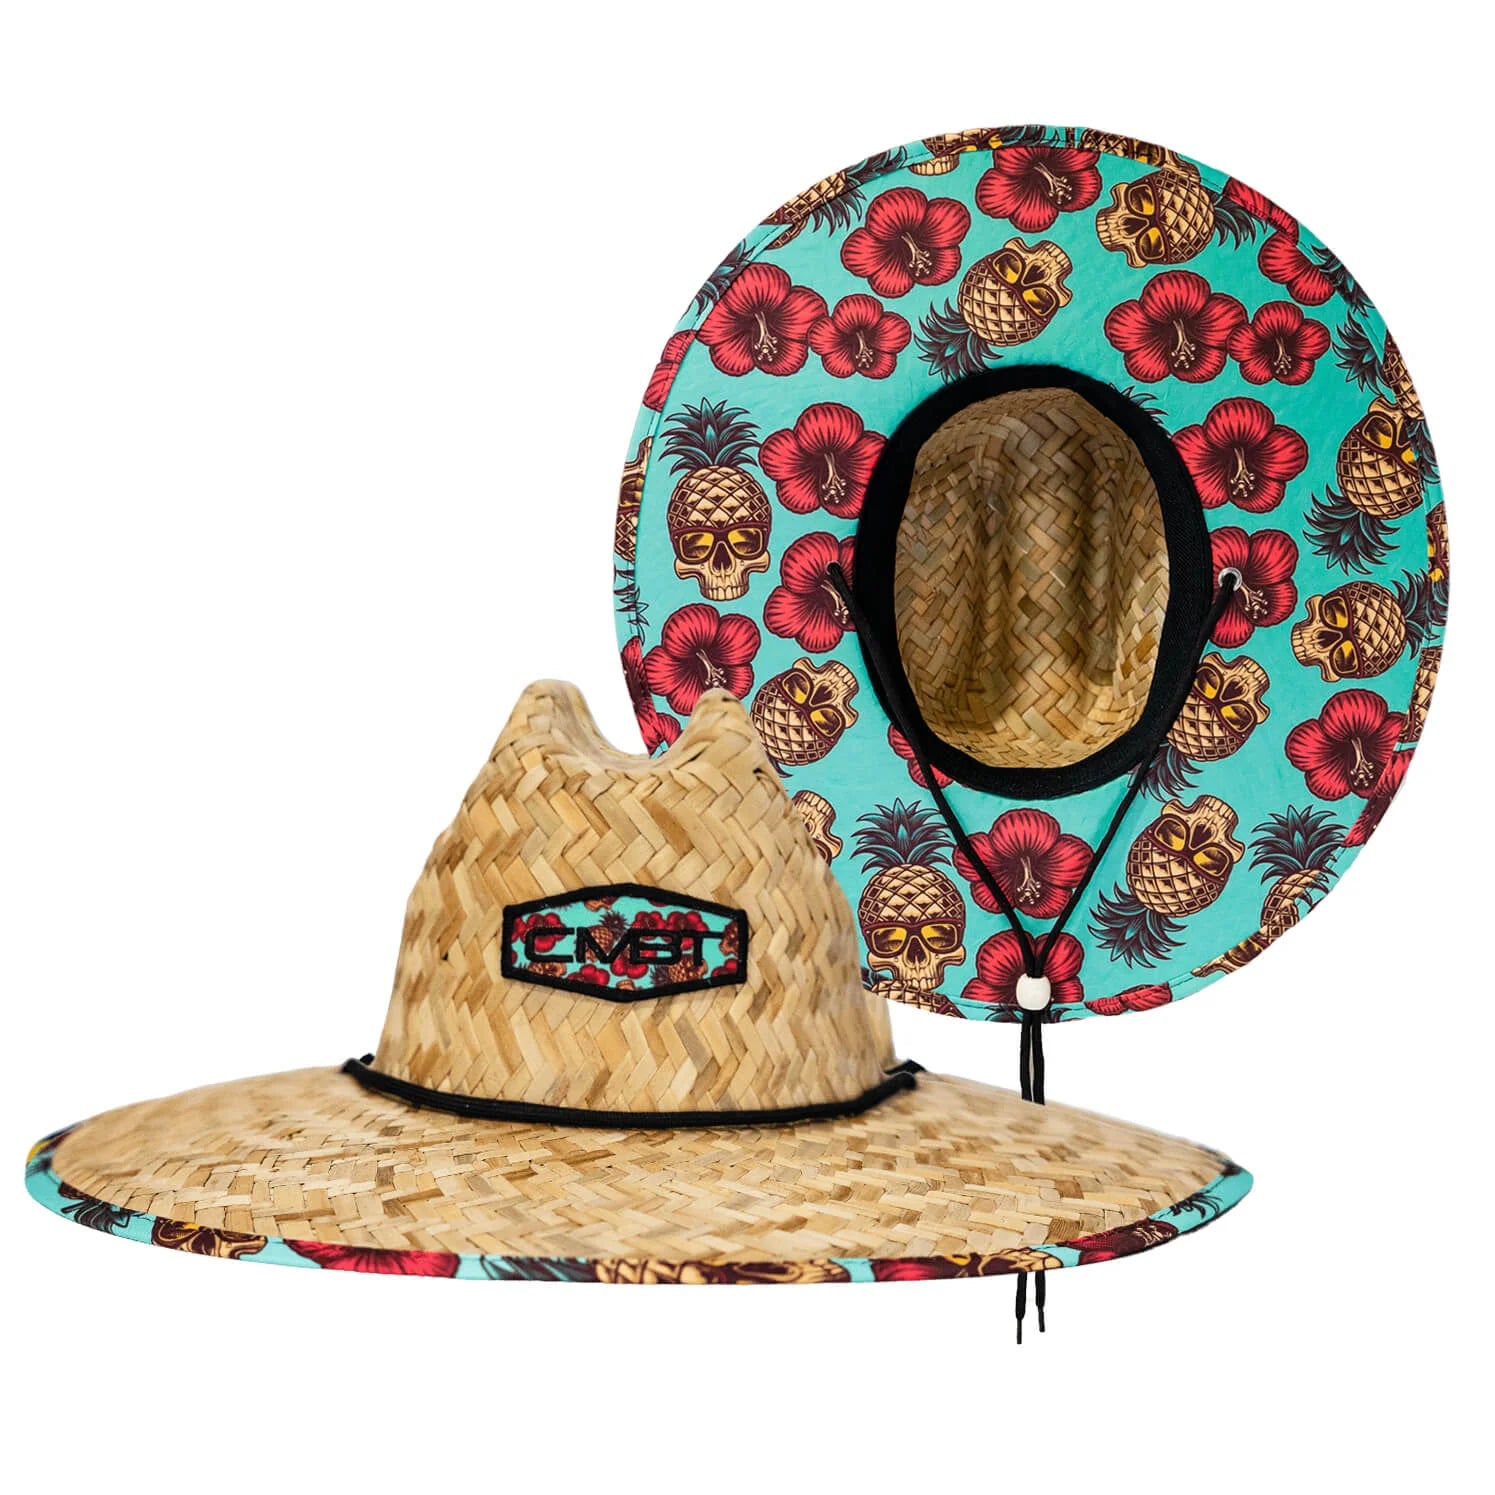 Pineapple Express Straw Hat